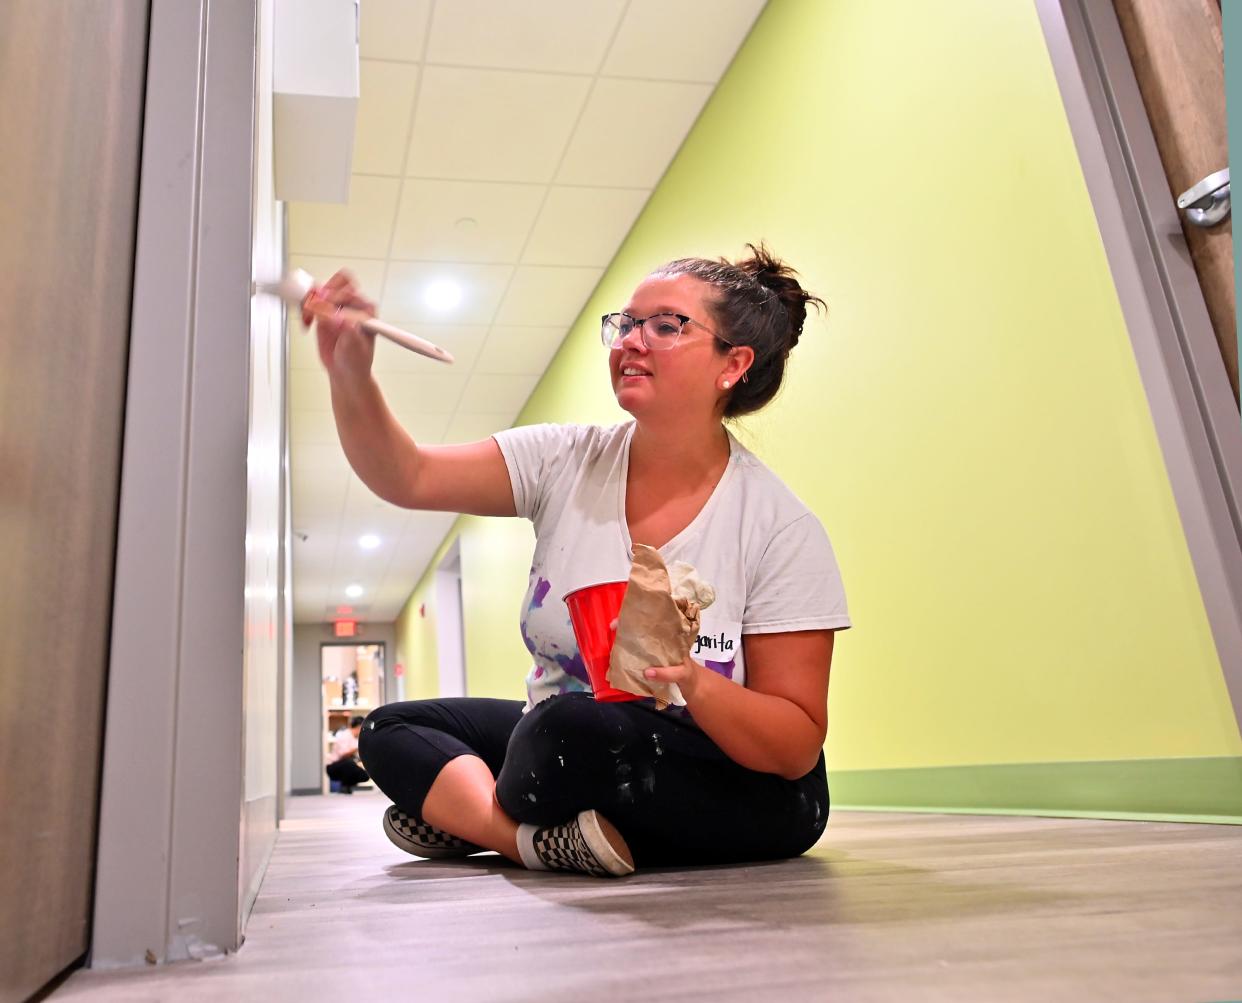 WORCESTER - UMass Chan Medical School employee Margarita Clarke of Auburn helps paint a hallway during the United Way of Central Massachusetts 30th Annual Day of Caring on Friday. 